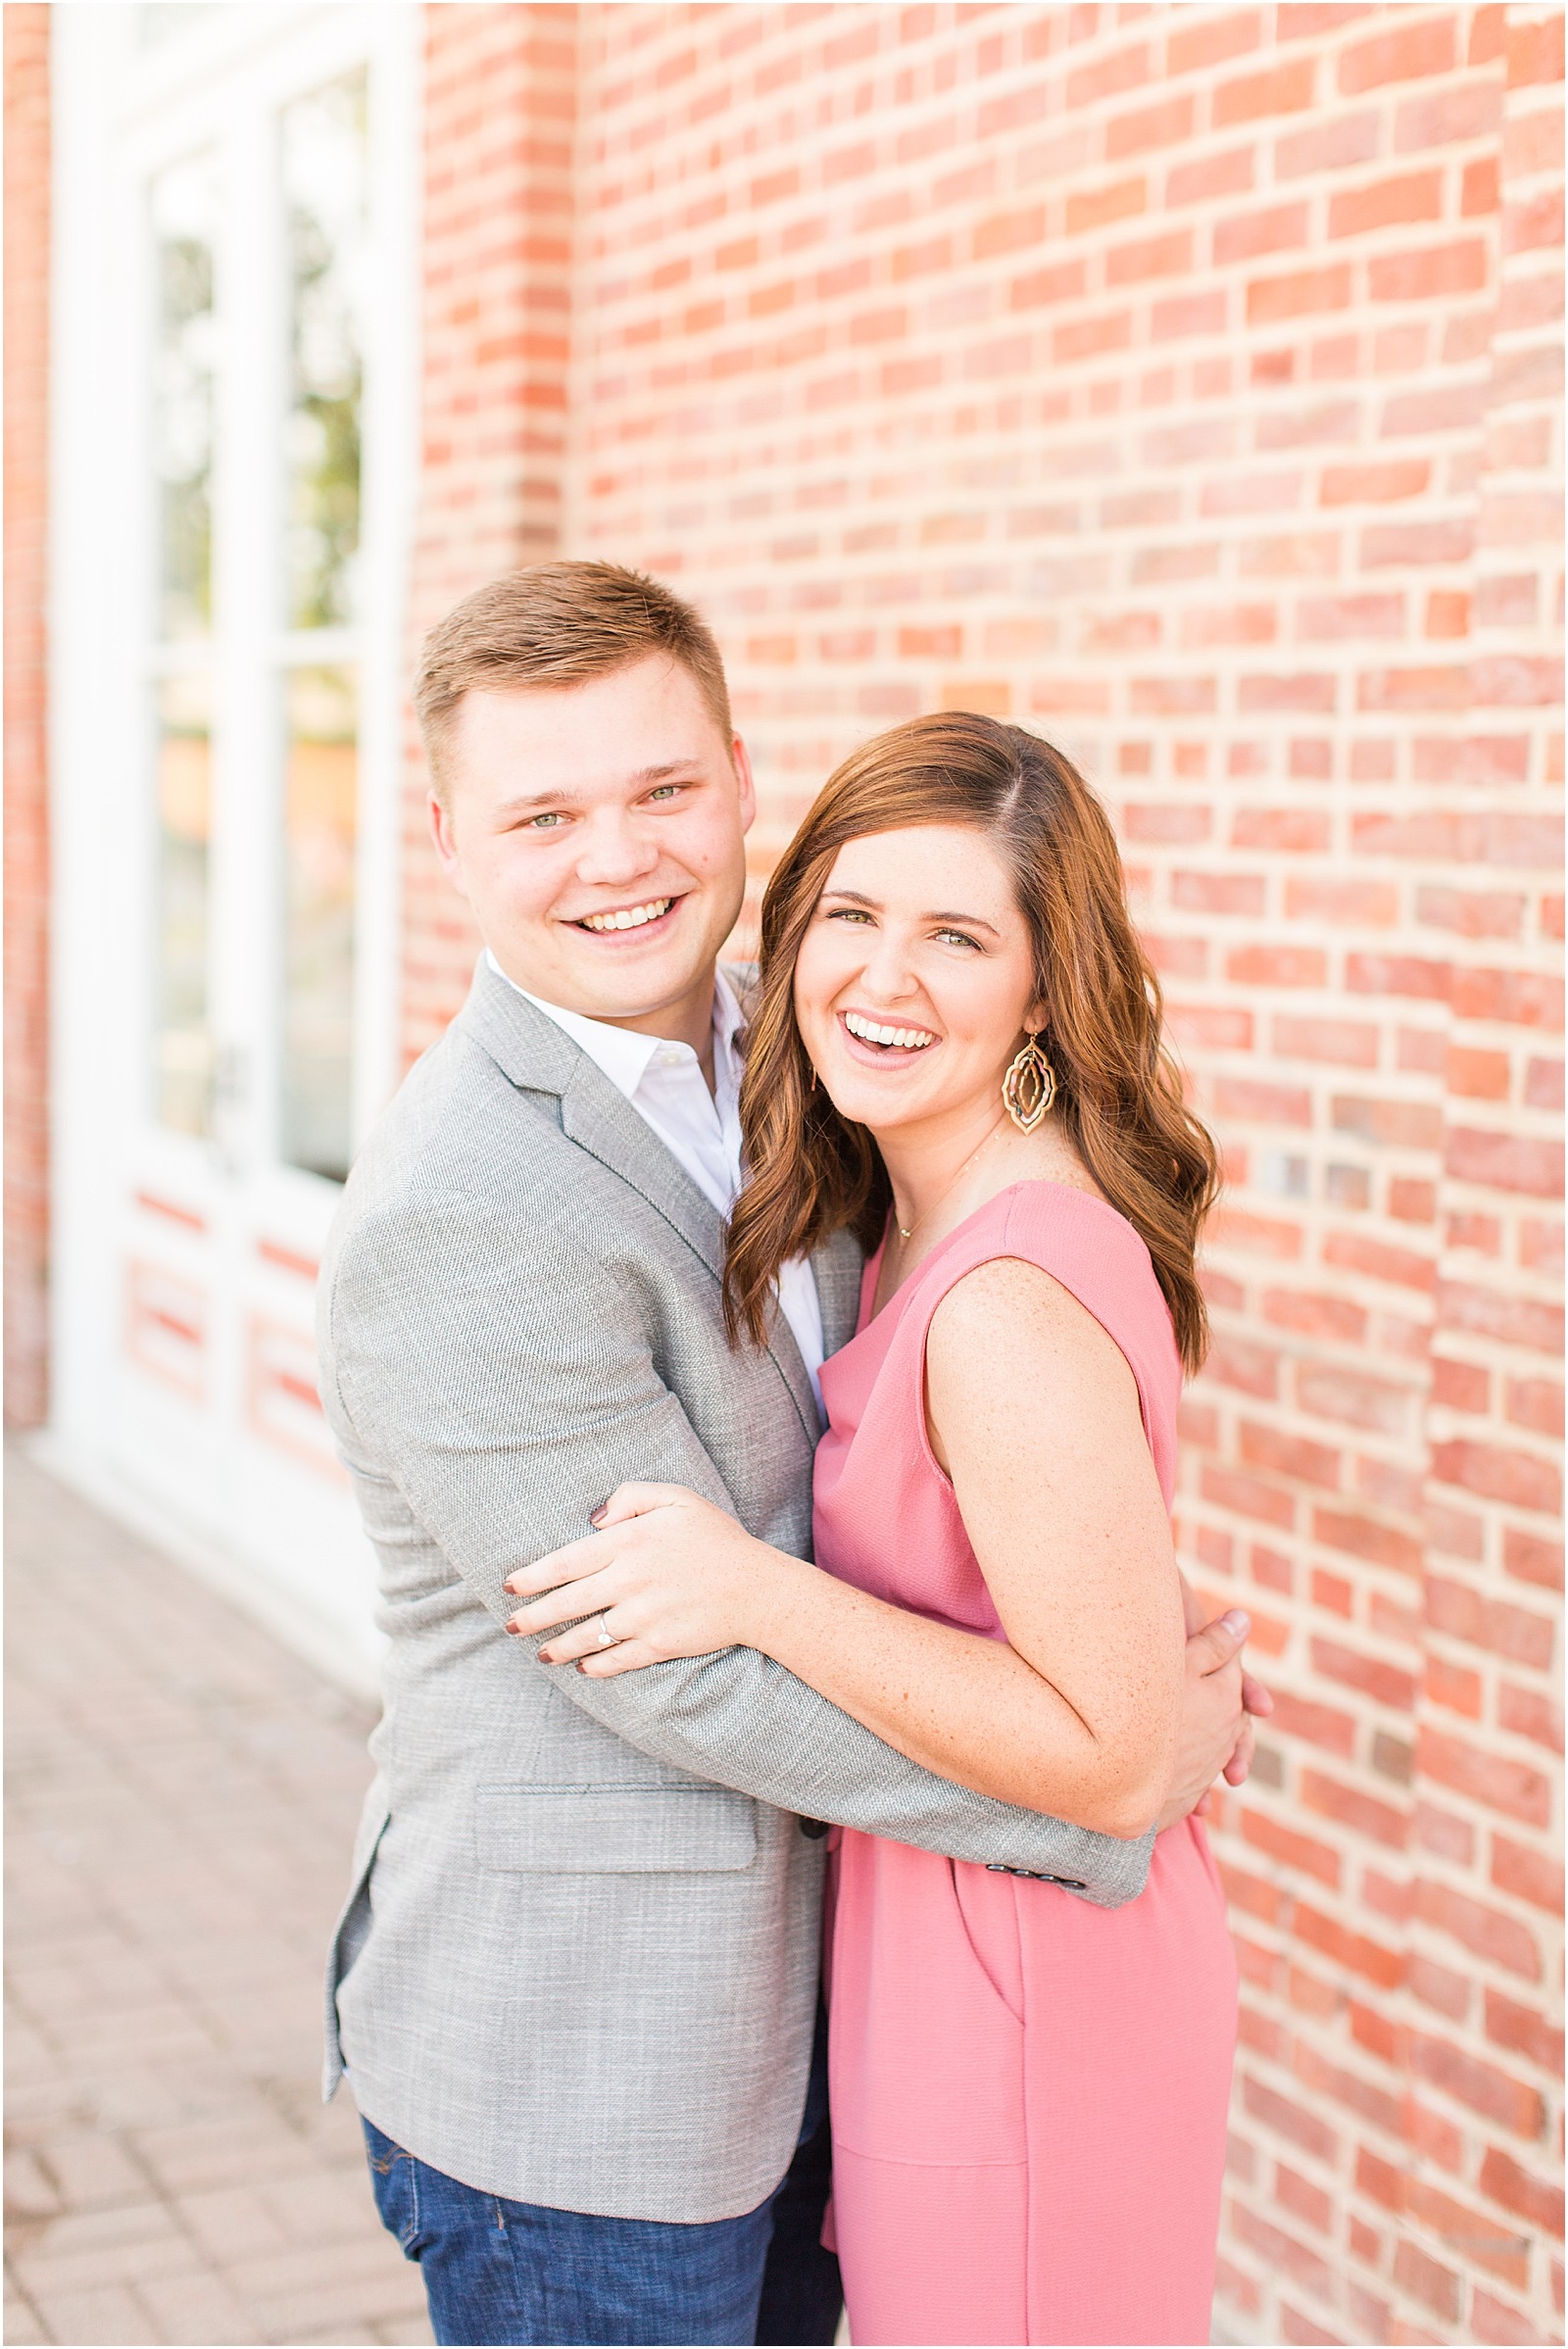 Downtown Huntingburgh Engagement Session | Gabby and Aidan | Bret and Brtandie Photography 001.jpg